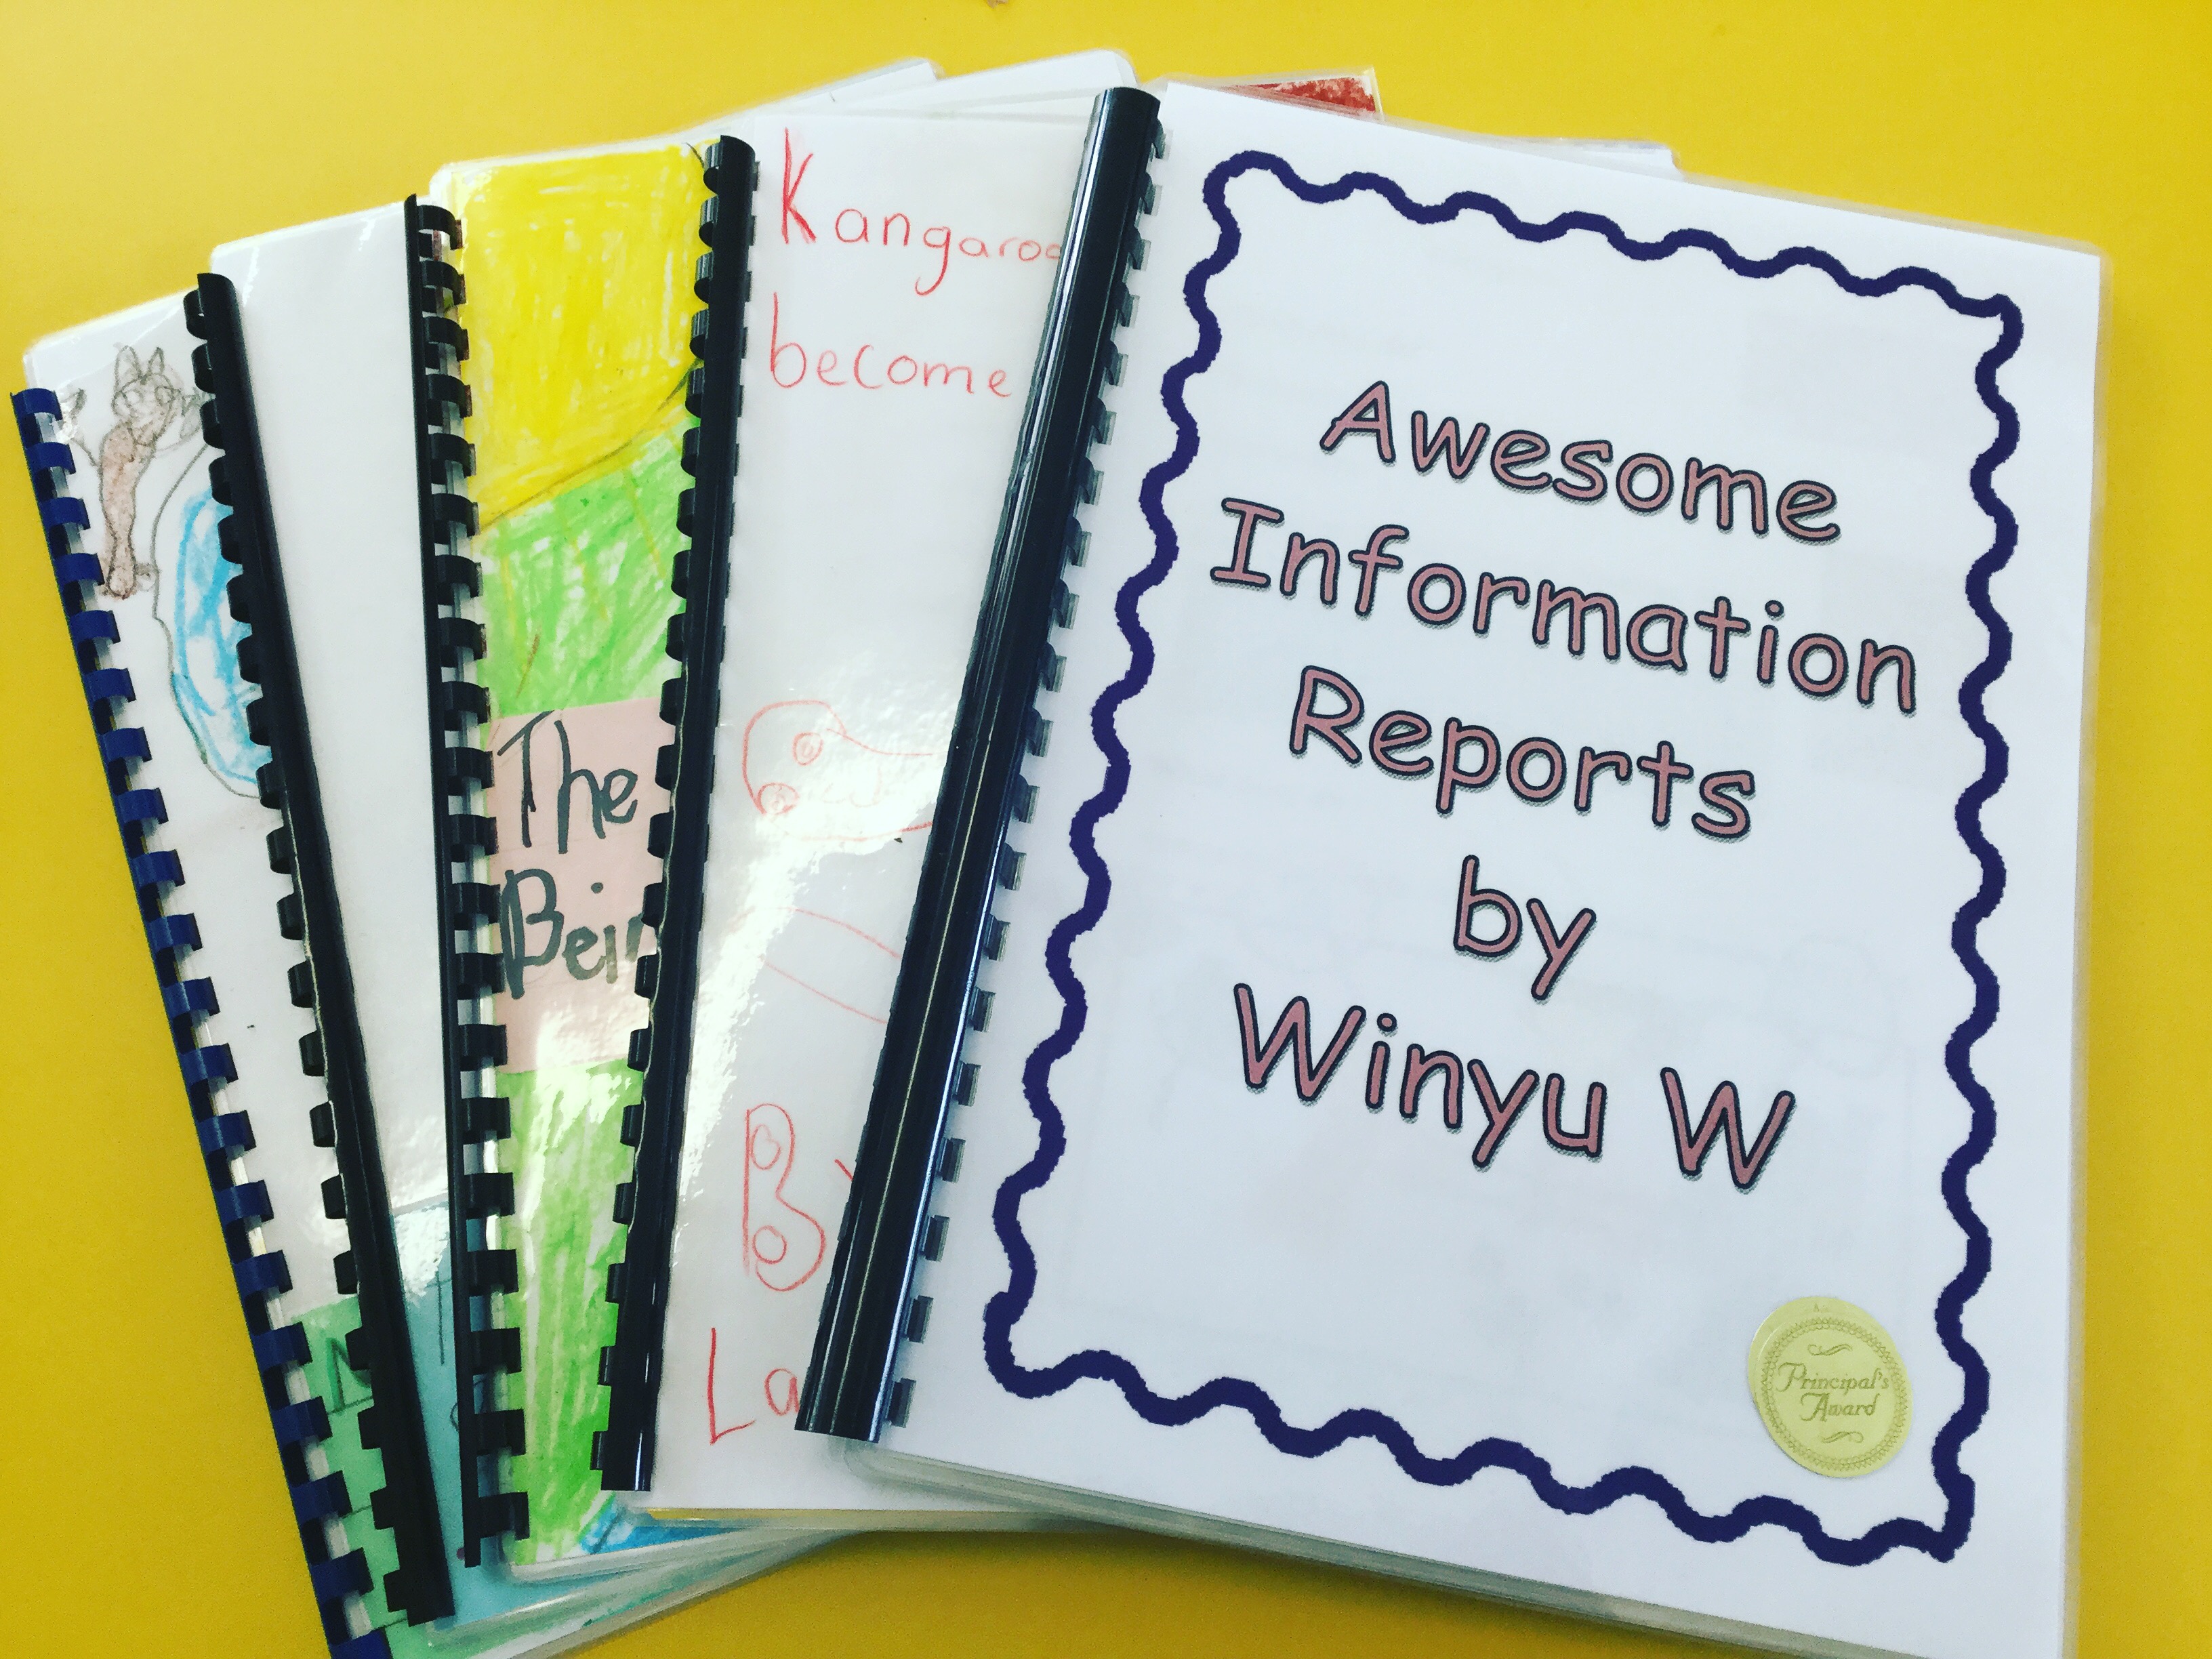 A selection of information reports that the students had written. 